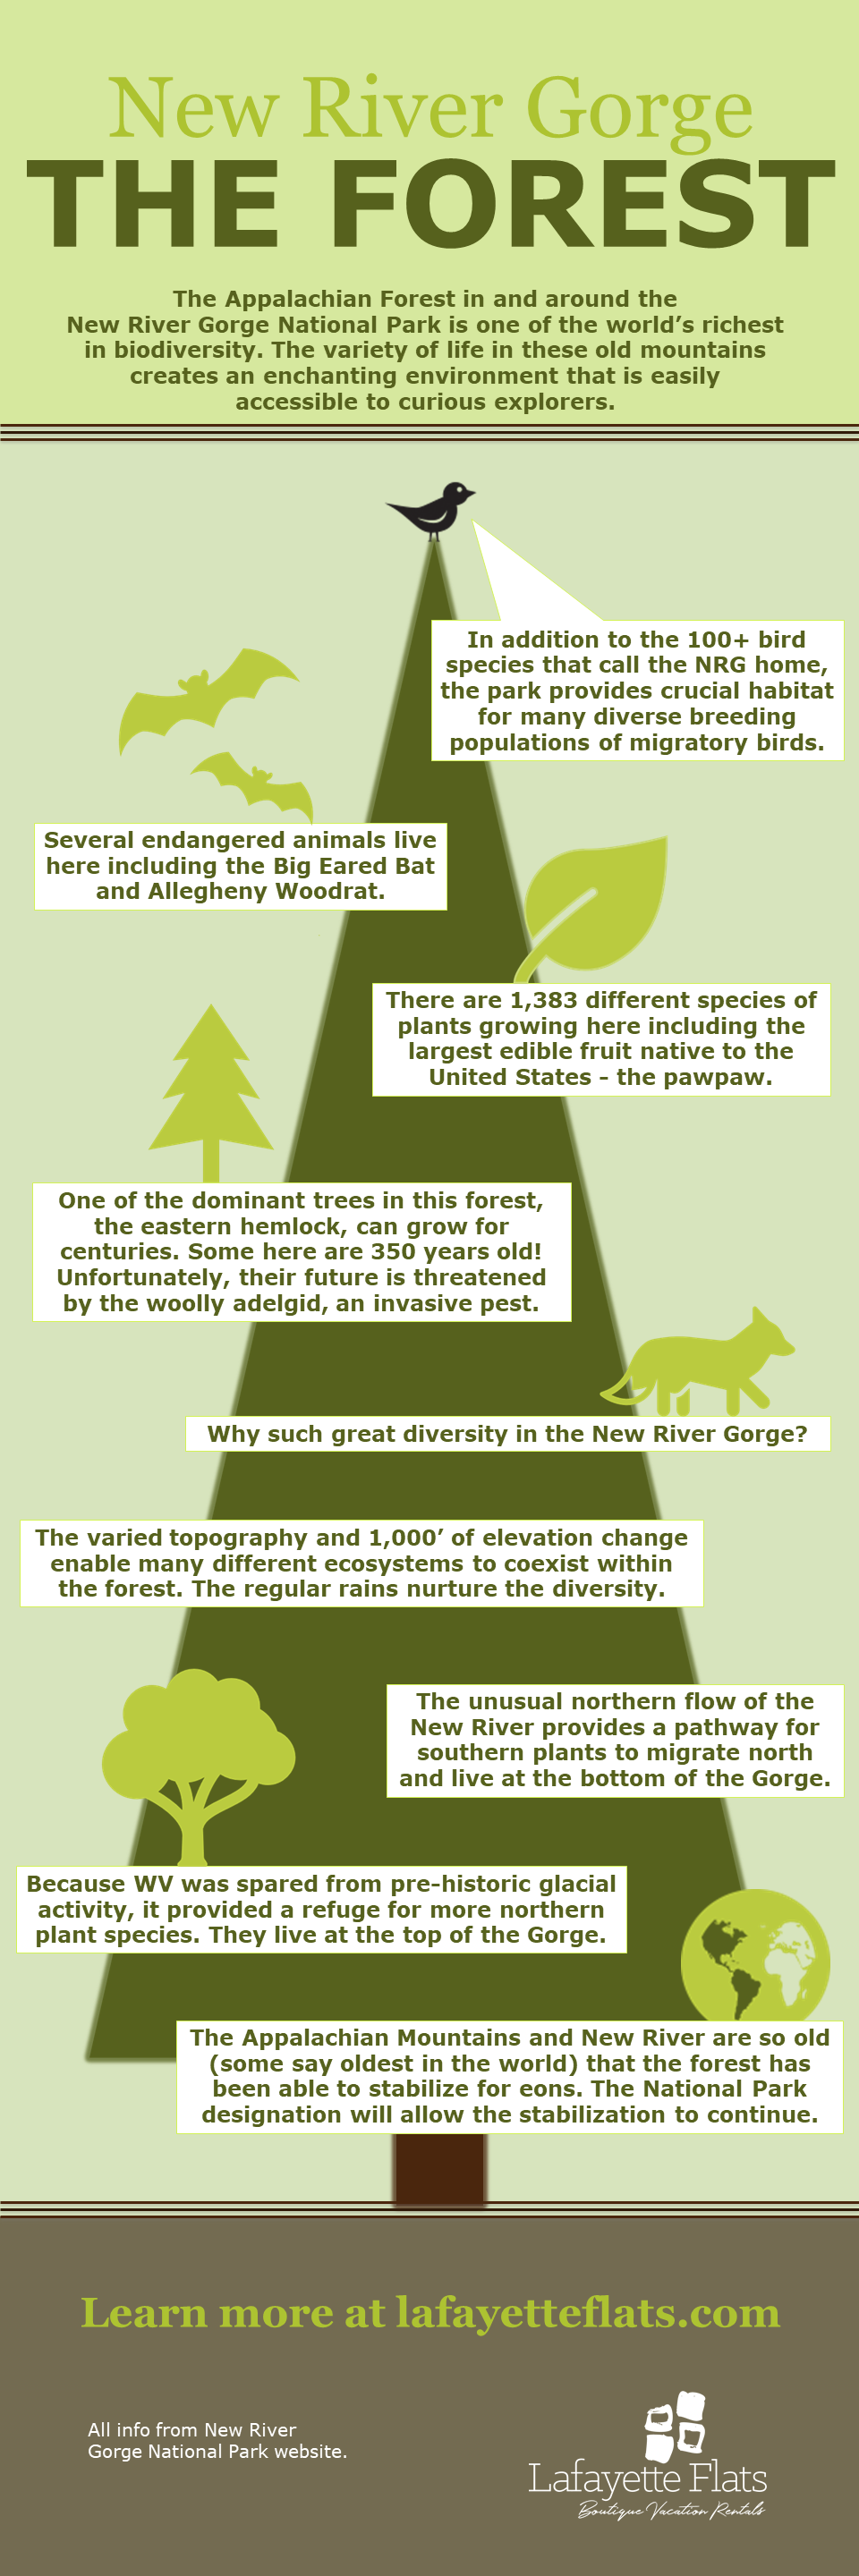 Interesting facts about the New River Gorge forest.